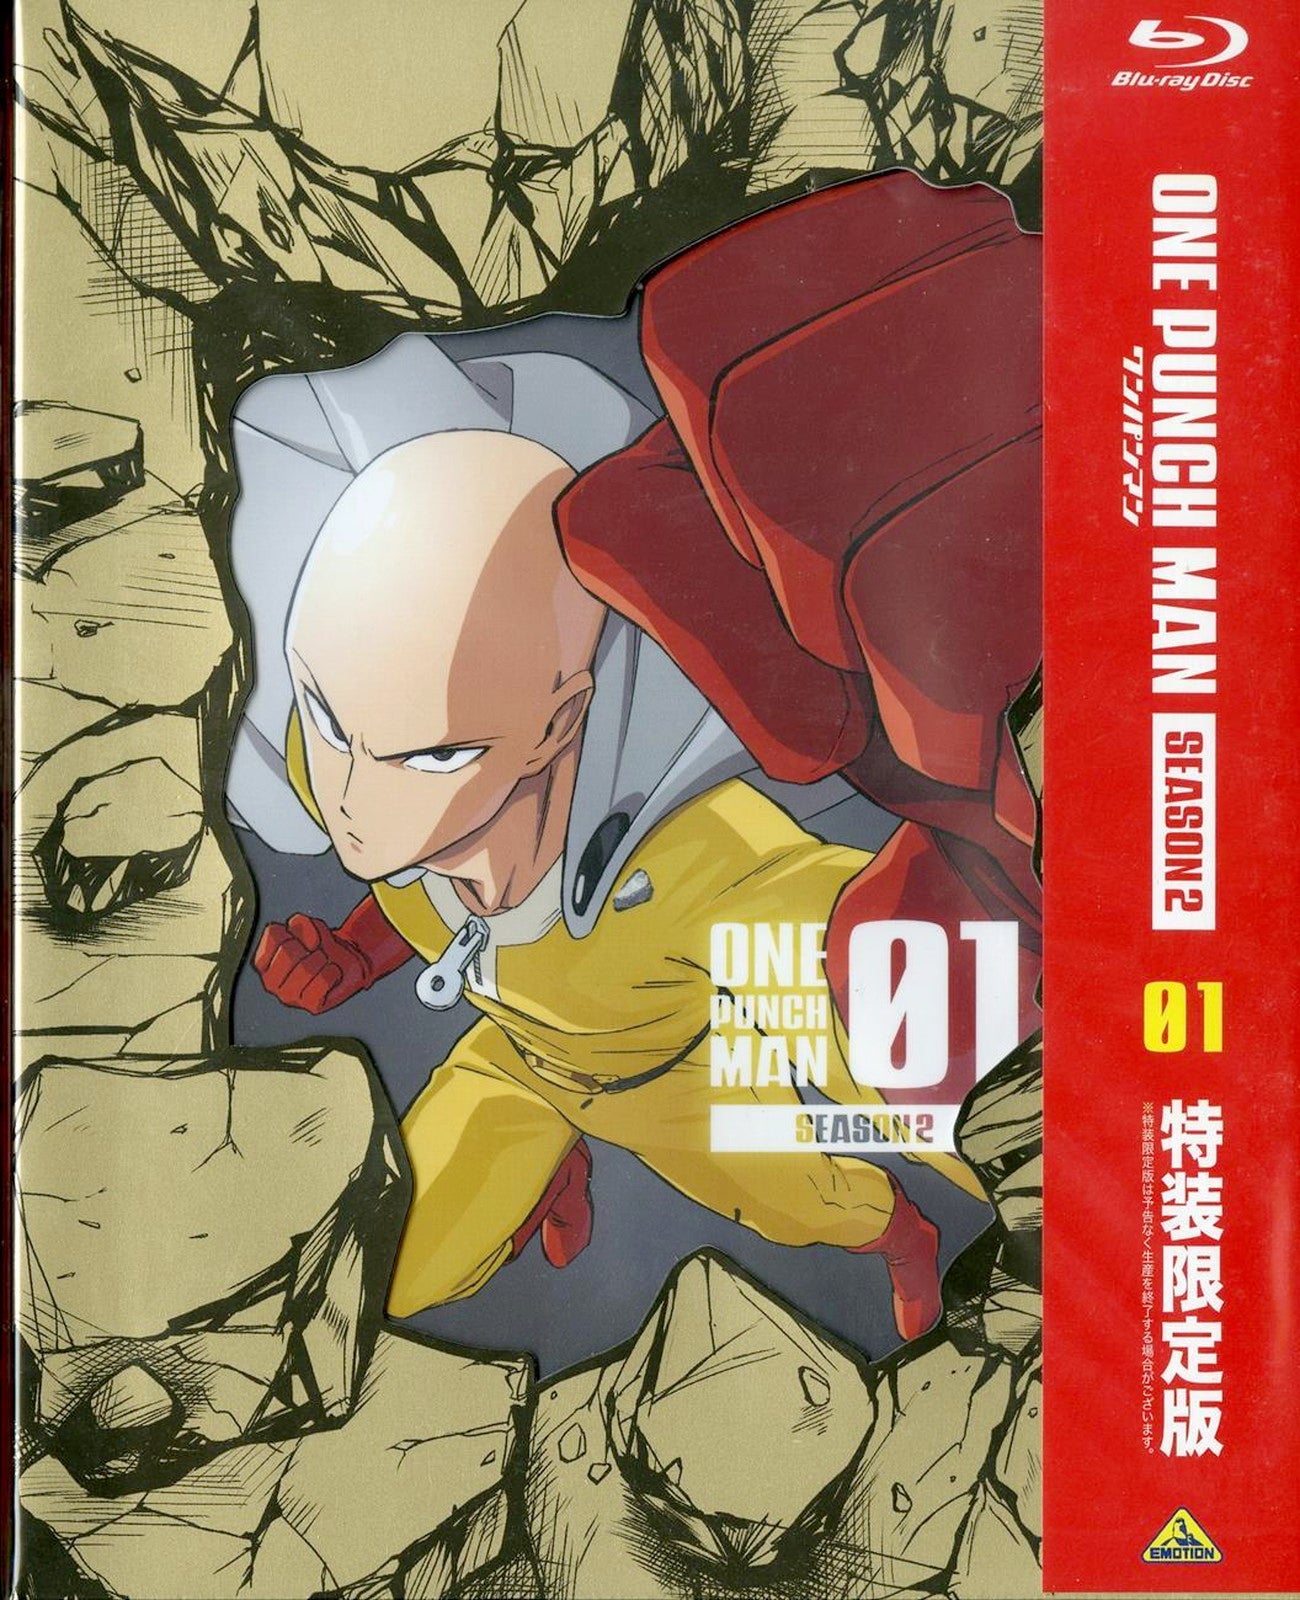 One-Punch Man, Vol. 2 (2) by ONE